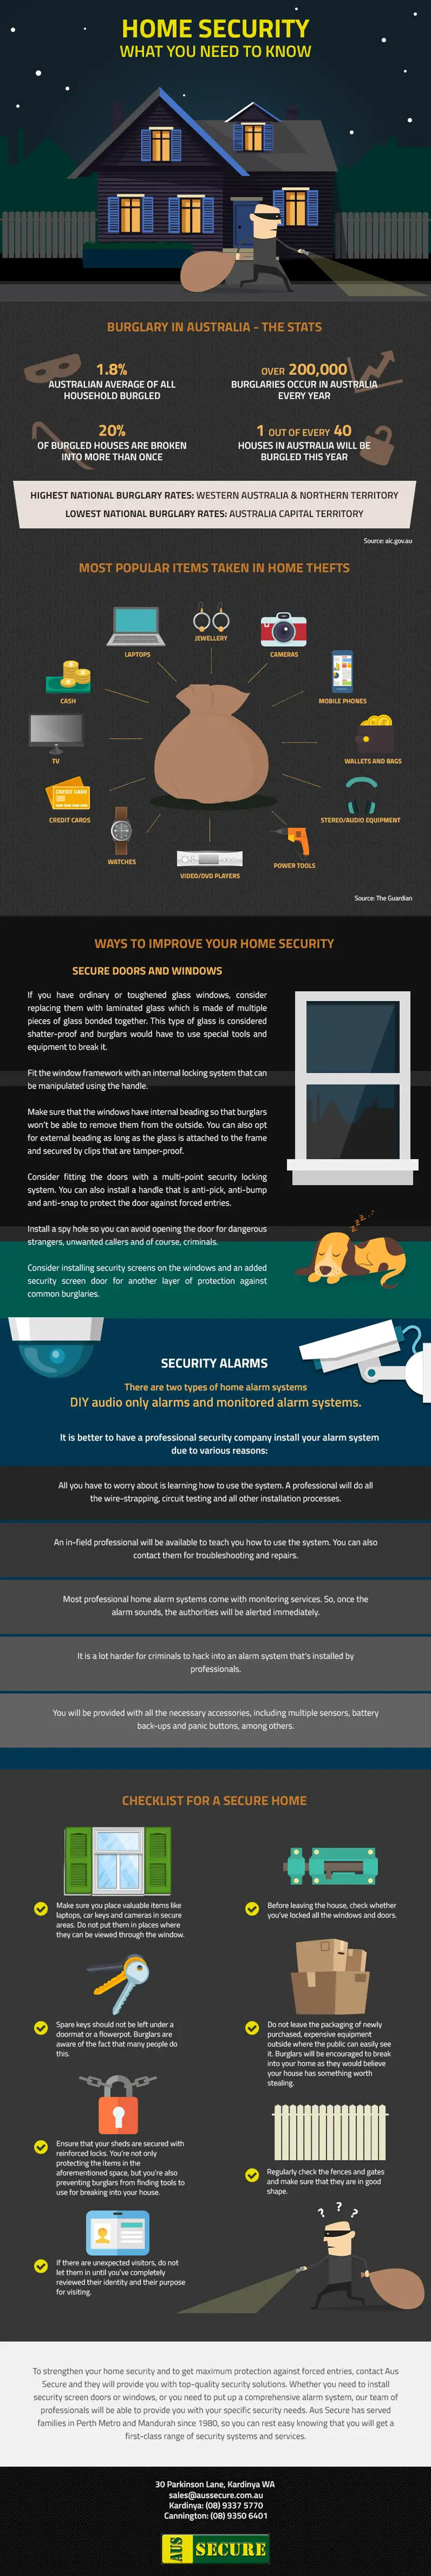 Home Security: What You Need To Do